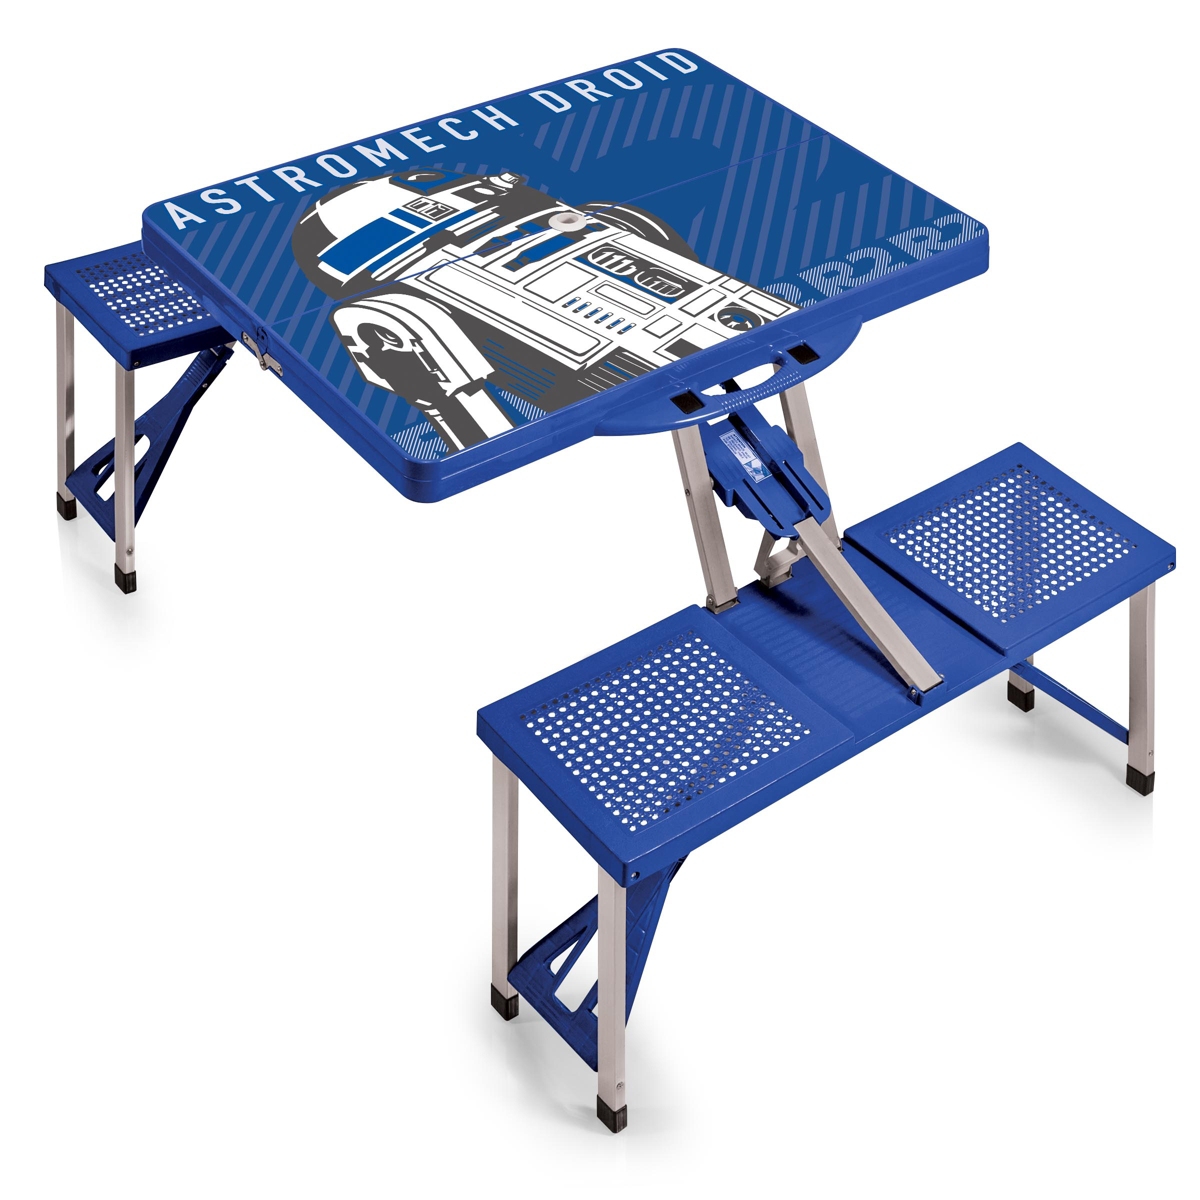 Oniva by Picnic Time Star Wars R2-D2 Picnic Table Portable Folding Table with Seats - Blue